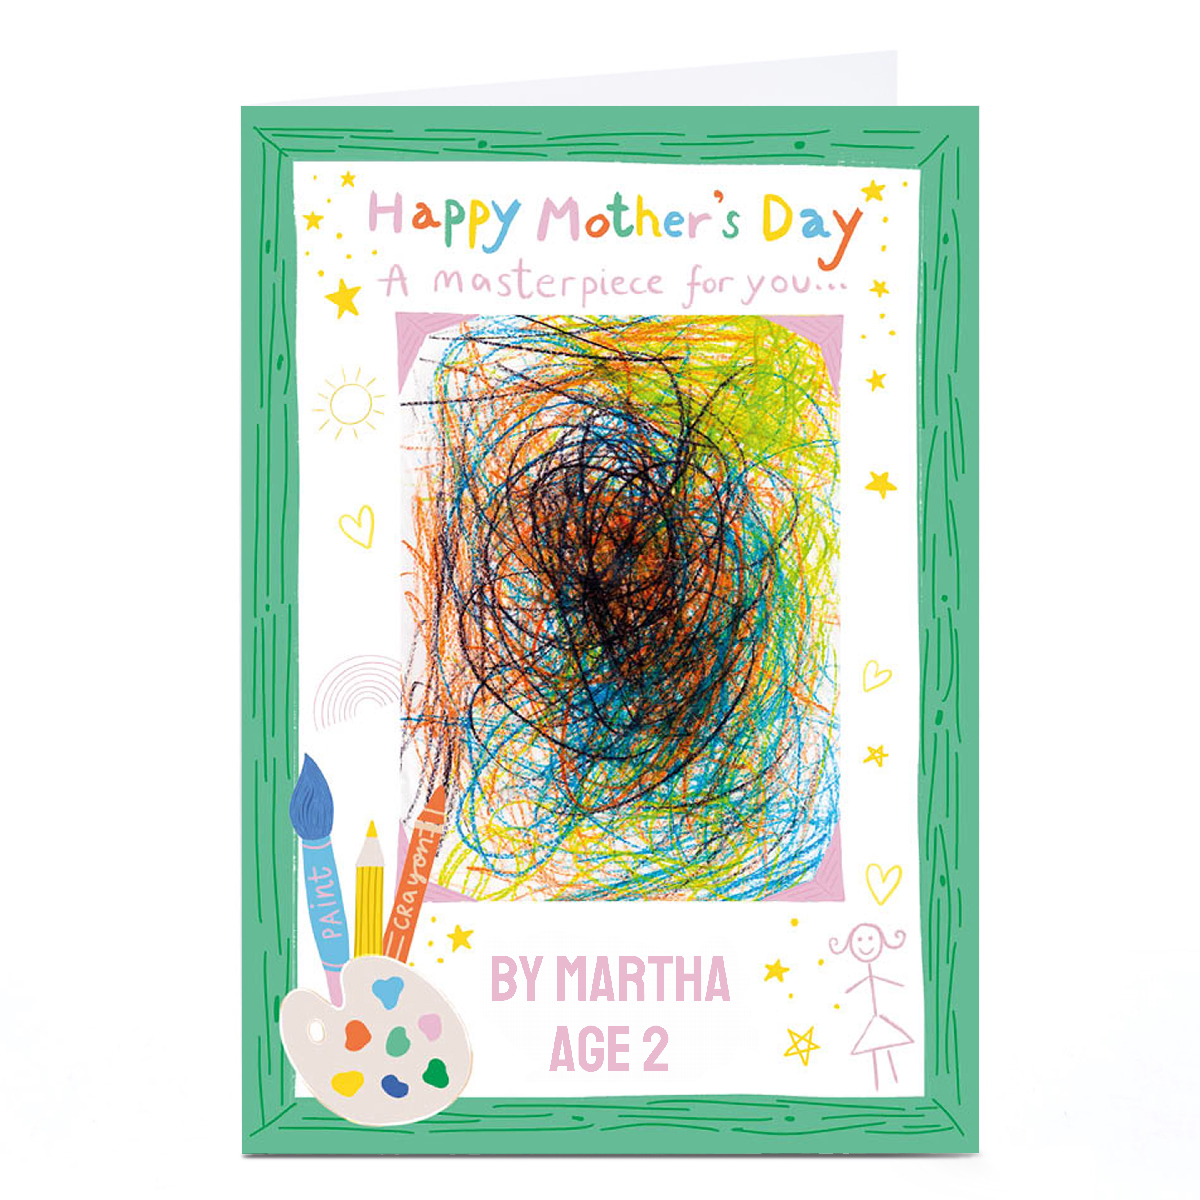 Photo Mother's Day Card - A Masterpiece For You